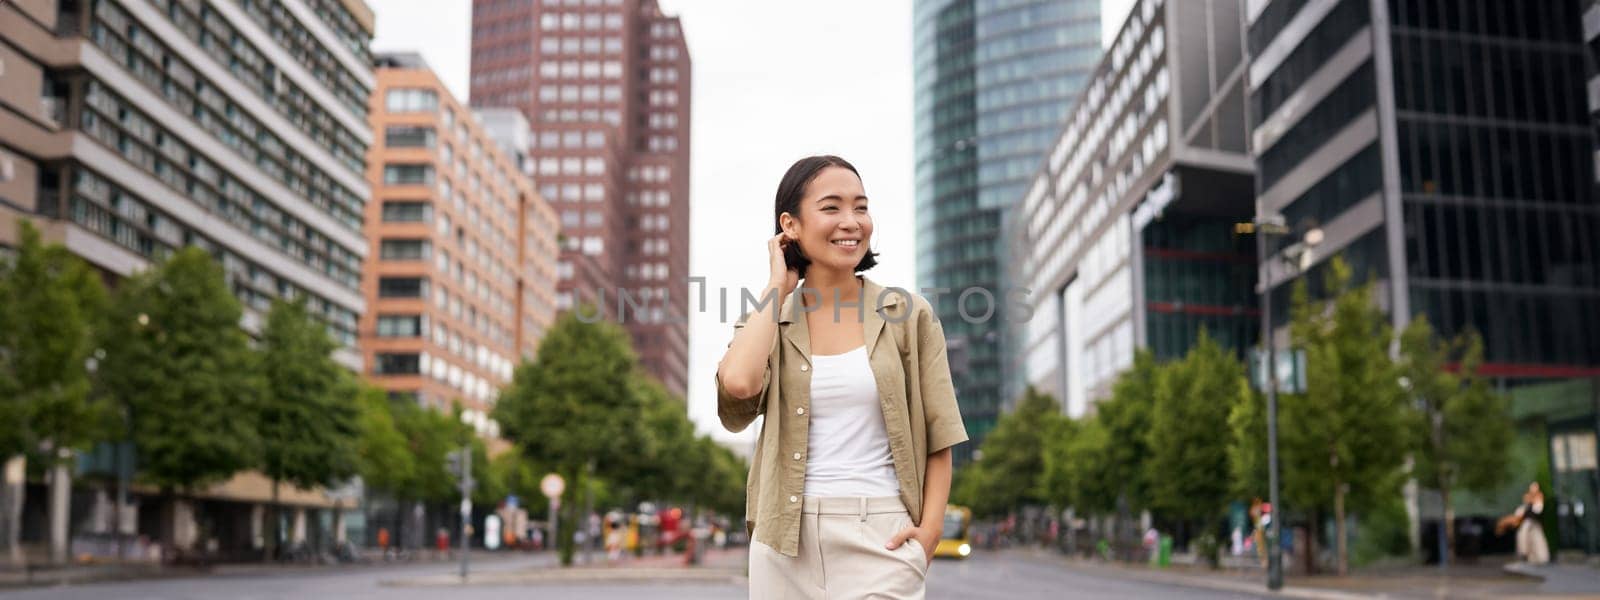 Outdoor shot of young smiling asian woman, standing on street in daytime, looking around, posing happy.